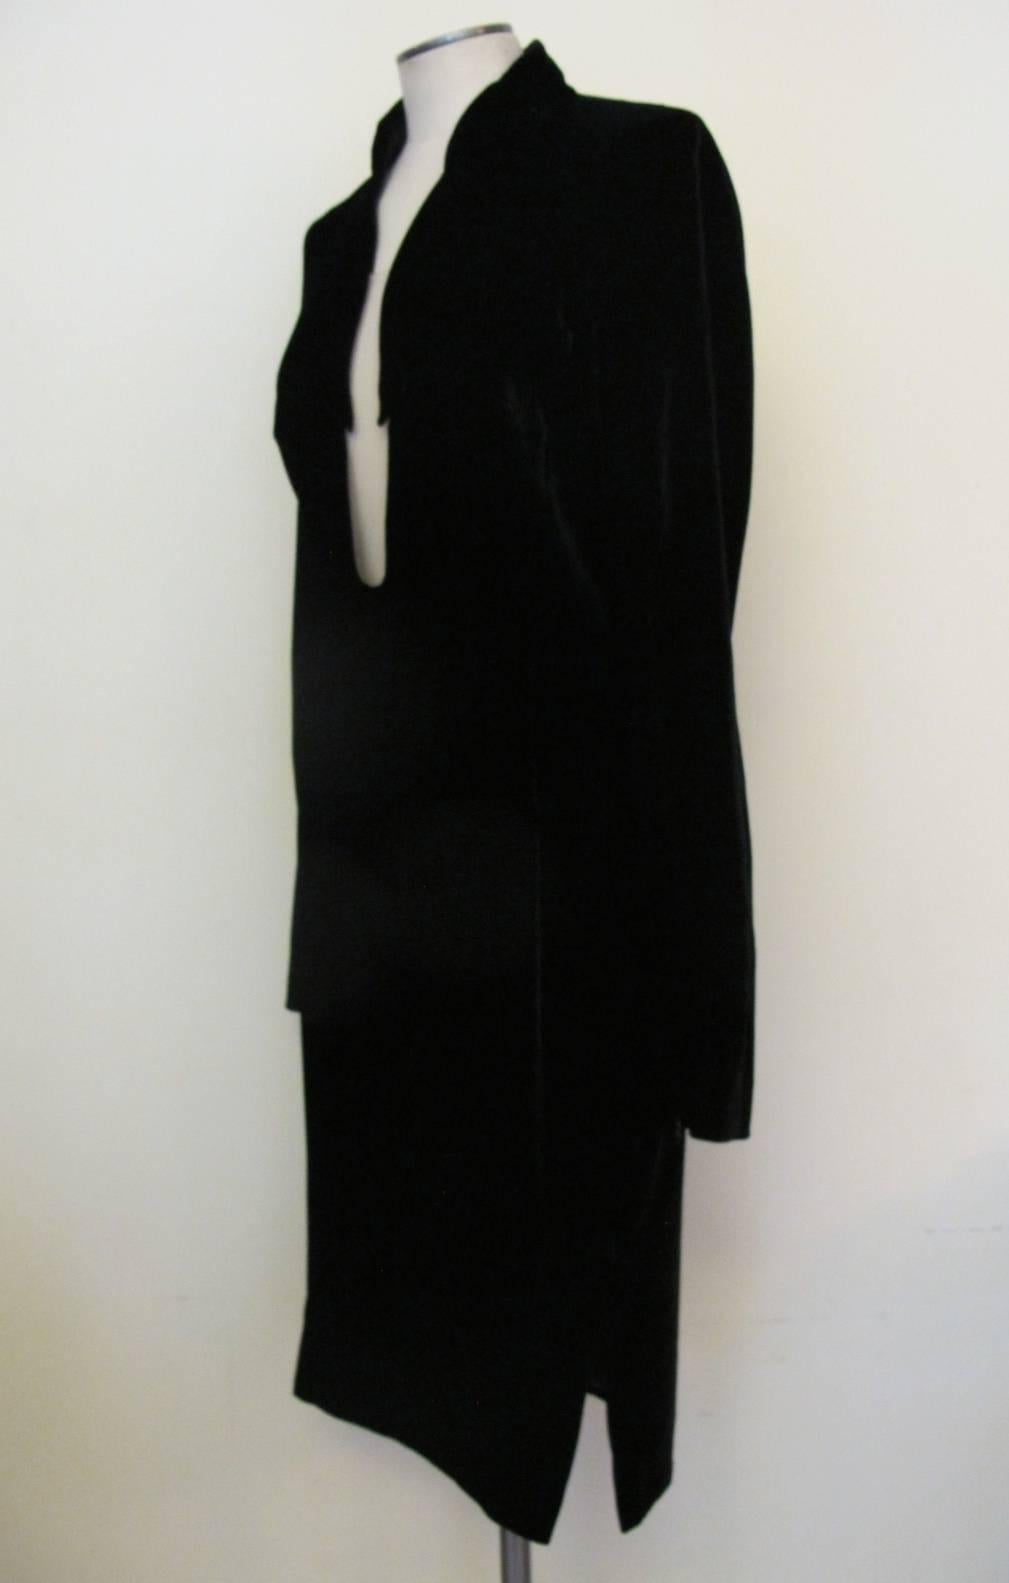 New Tom Ford Runway Black Velvet Cocktail Dress In New Condition For Sale In San Francisco, CA